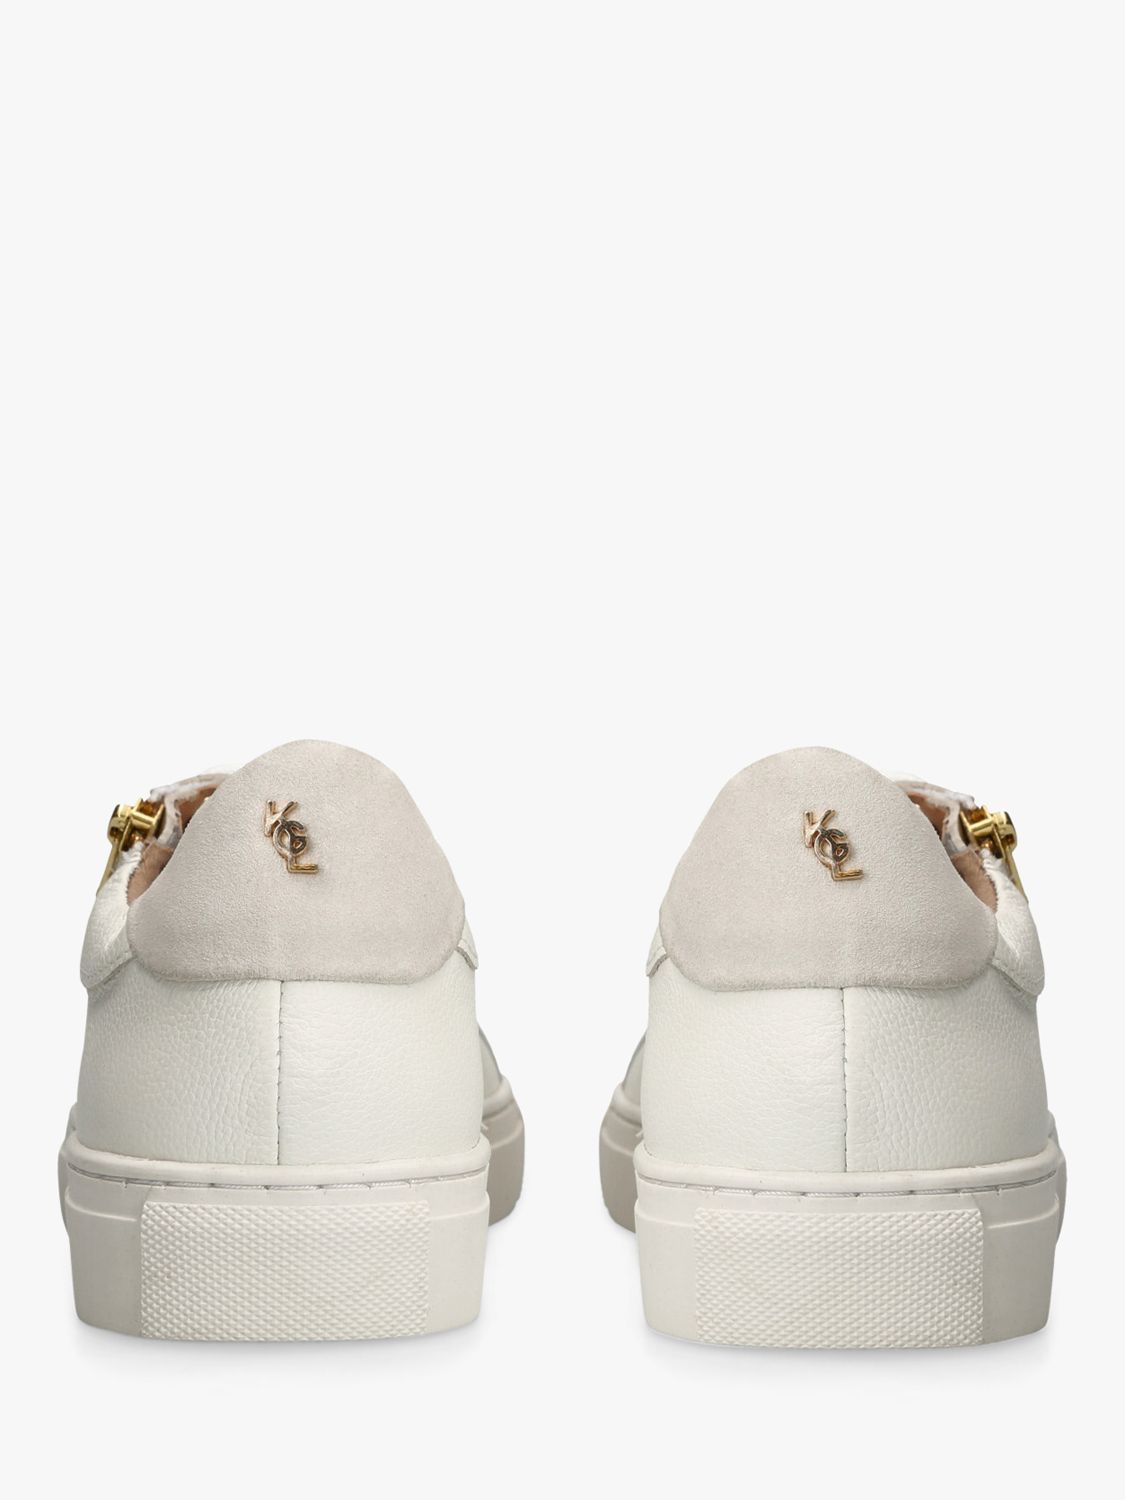 Buy KG Kurt Geiger Dulwich Leather Zip Trainers, White Online at johnlewis.com